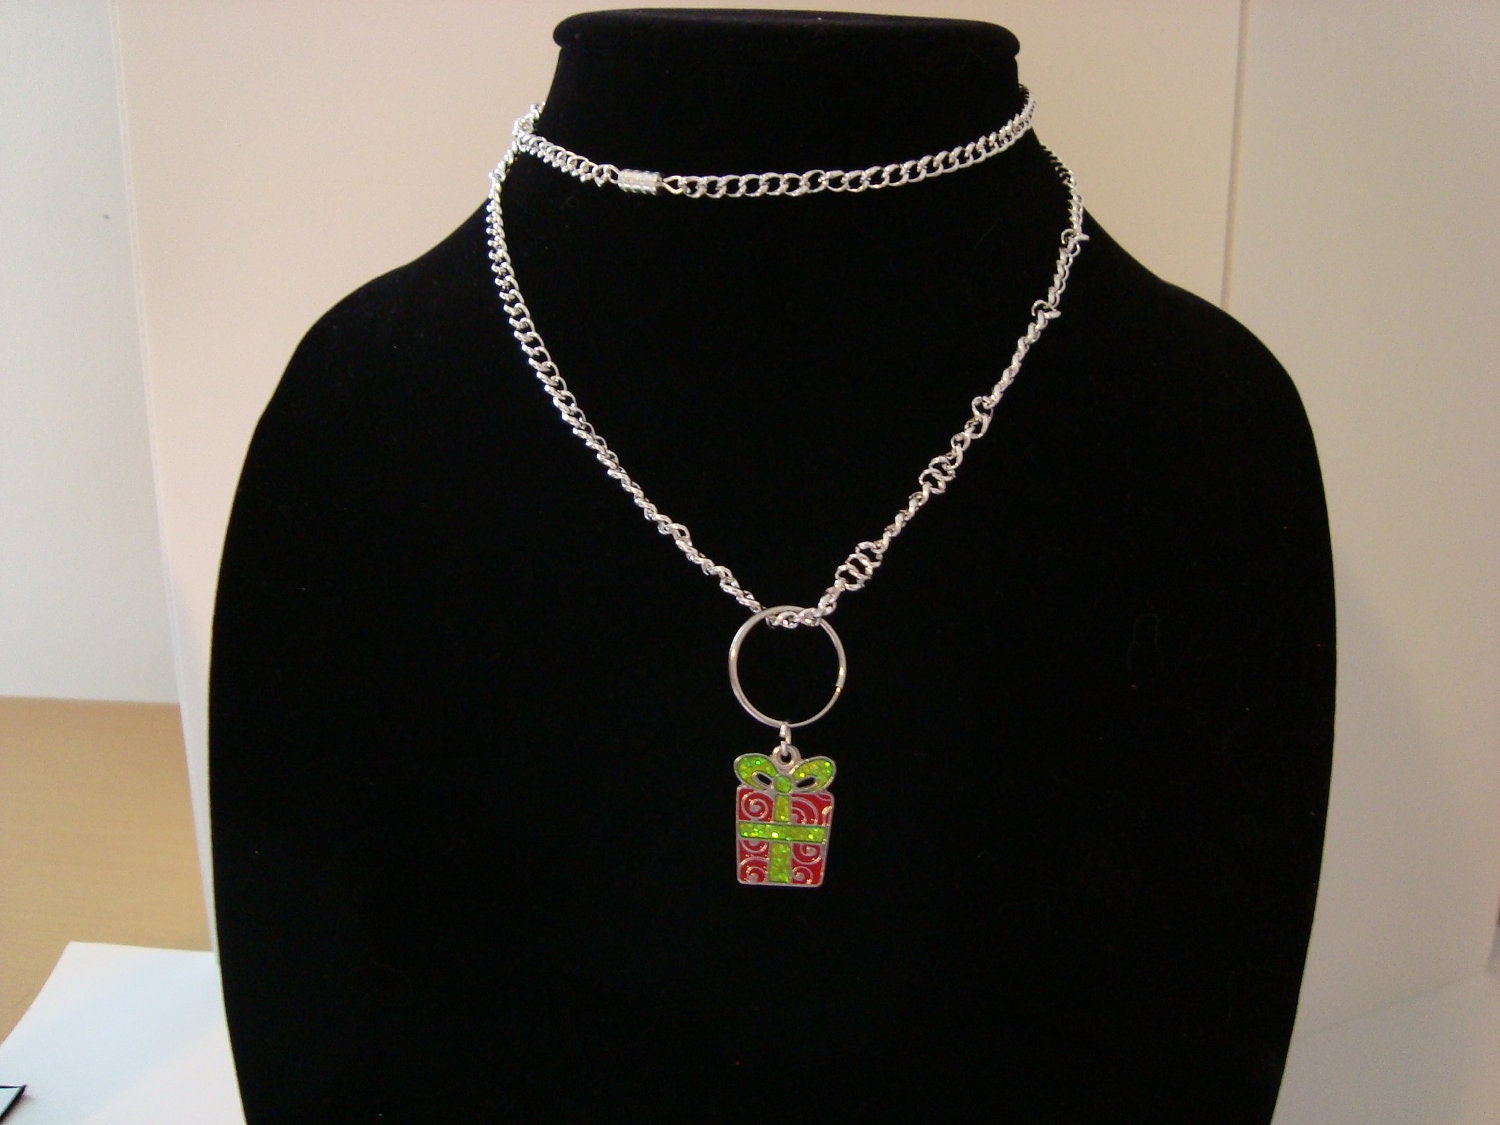 Holiday gift charm on silver chain necklace